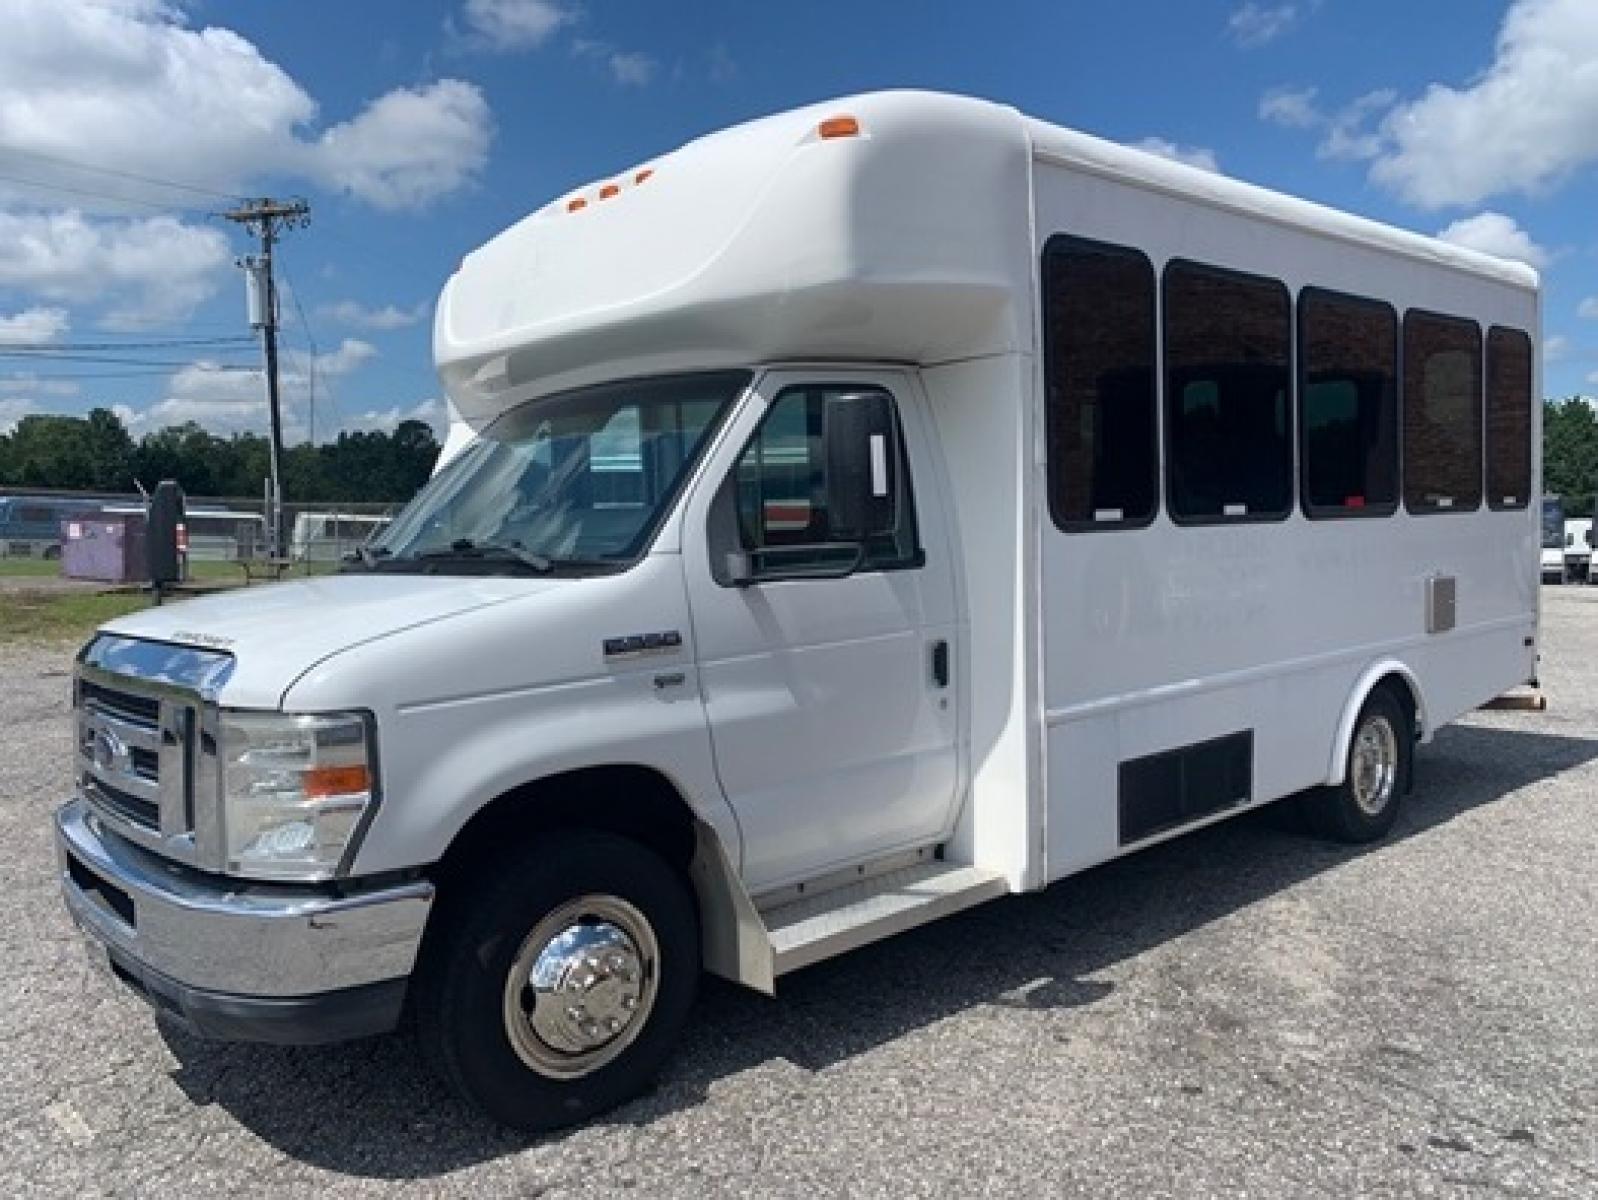 2012 White /Blue Ford E350 with an 5.4L engine, Auto transmission, 0.000000, 0.000000 - 2012 Ford E-350 Starcraft Conversion - 5.4L V8 Gas Engine - Automatic Trans - Electric Entrance Door - 8 Passengers + 2 Wheelchairs - Mid Back Seats - Retractable Seat Belts - Stainless Wheel Simulators - Front and Rear A/C - Handicap Lift - 6 New Tire s - Photo #5